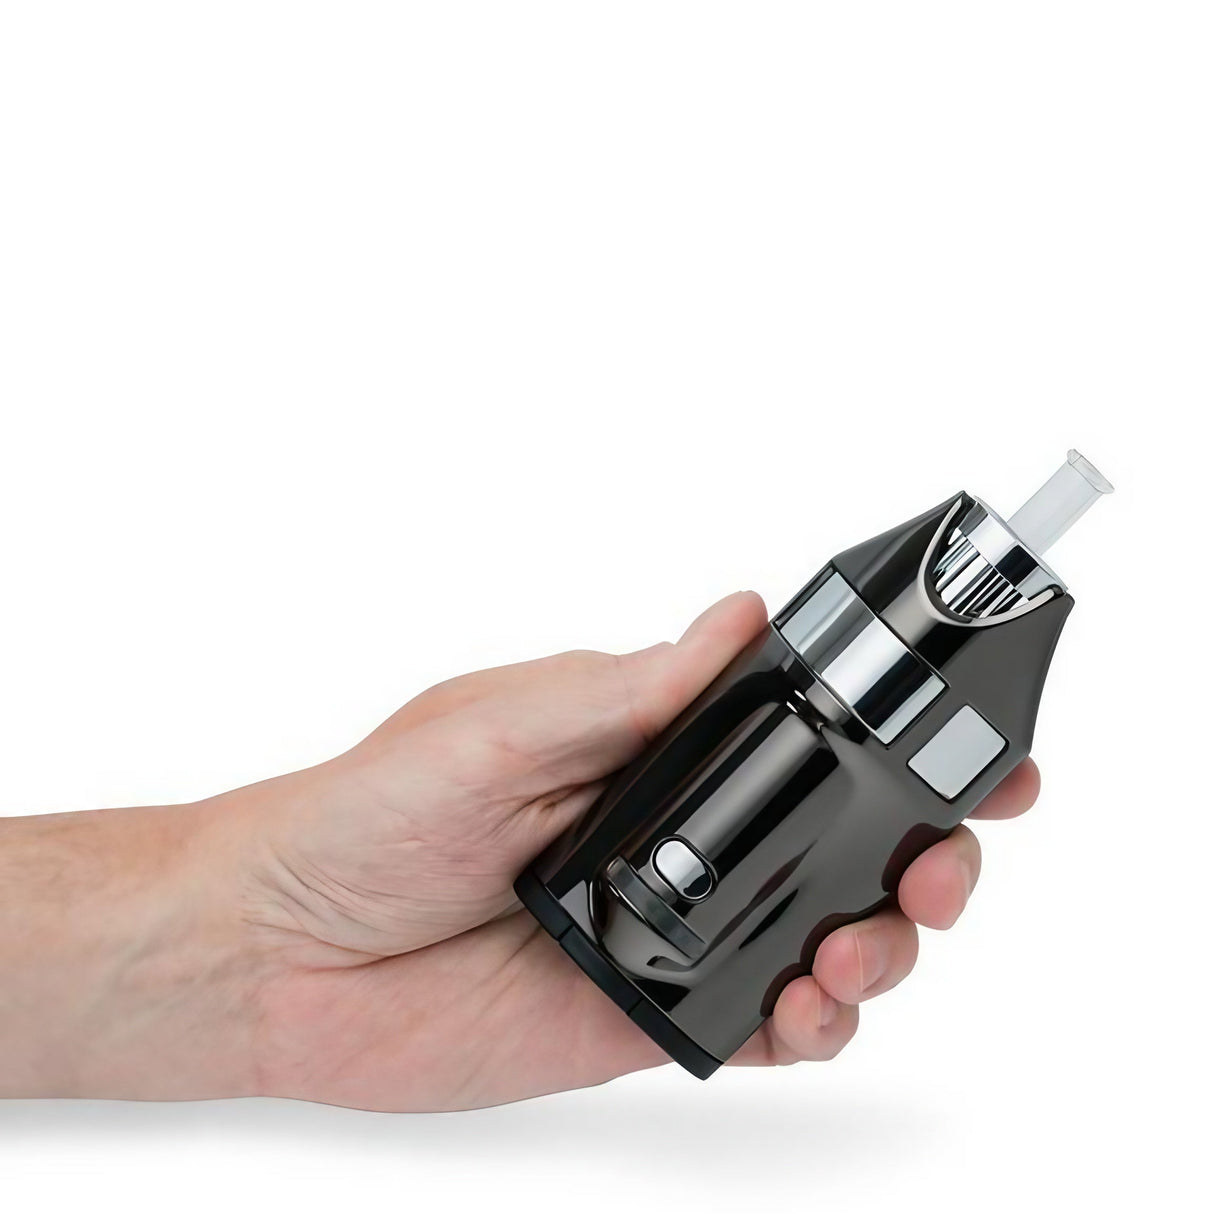 Hand holding GHOST Vapes MV1 Herb & Wax Vaporizer, sleek design, front view on white background